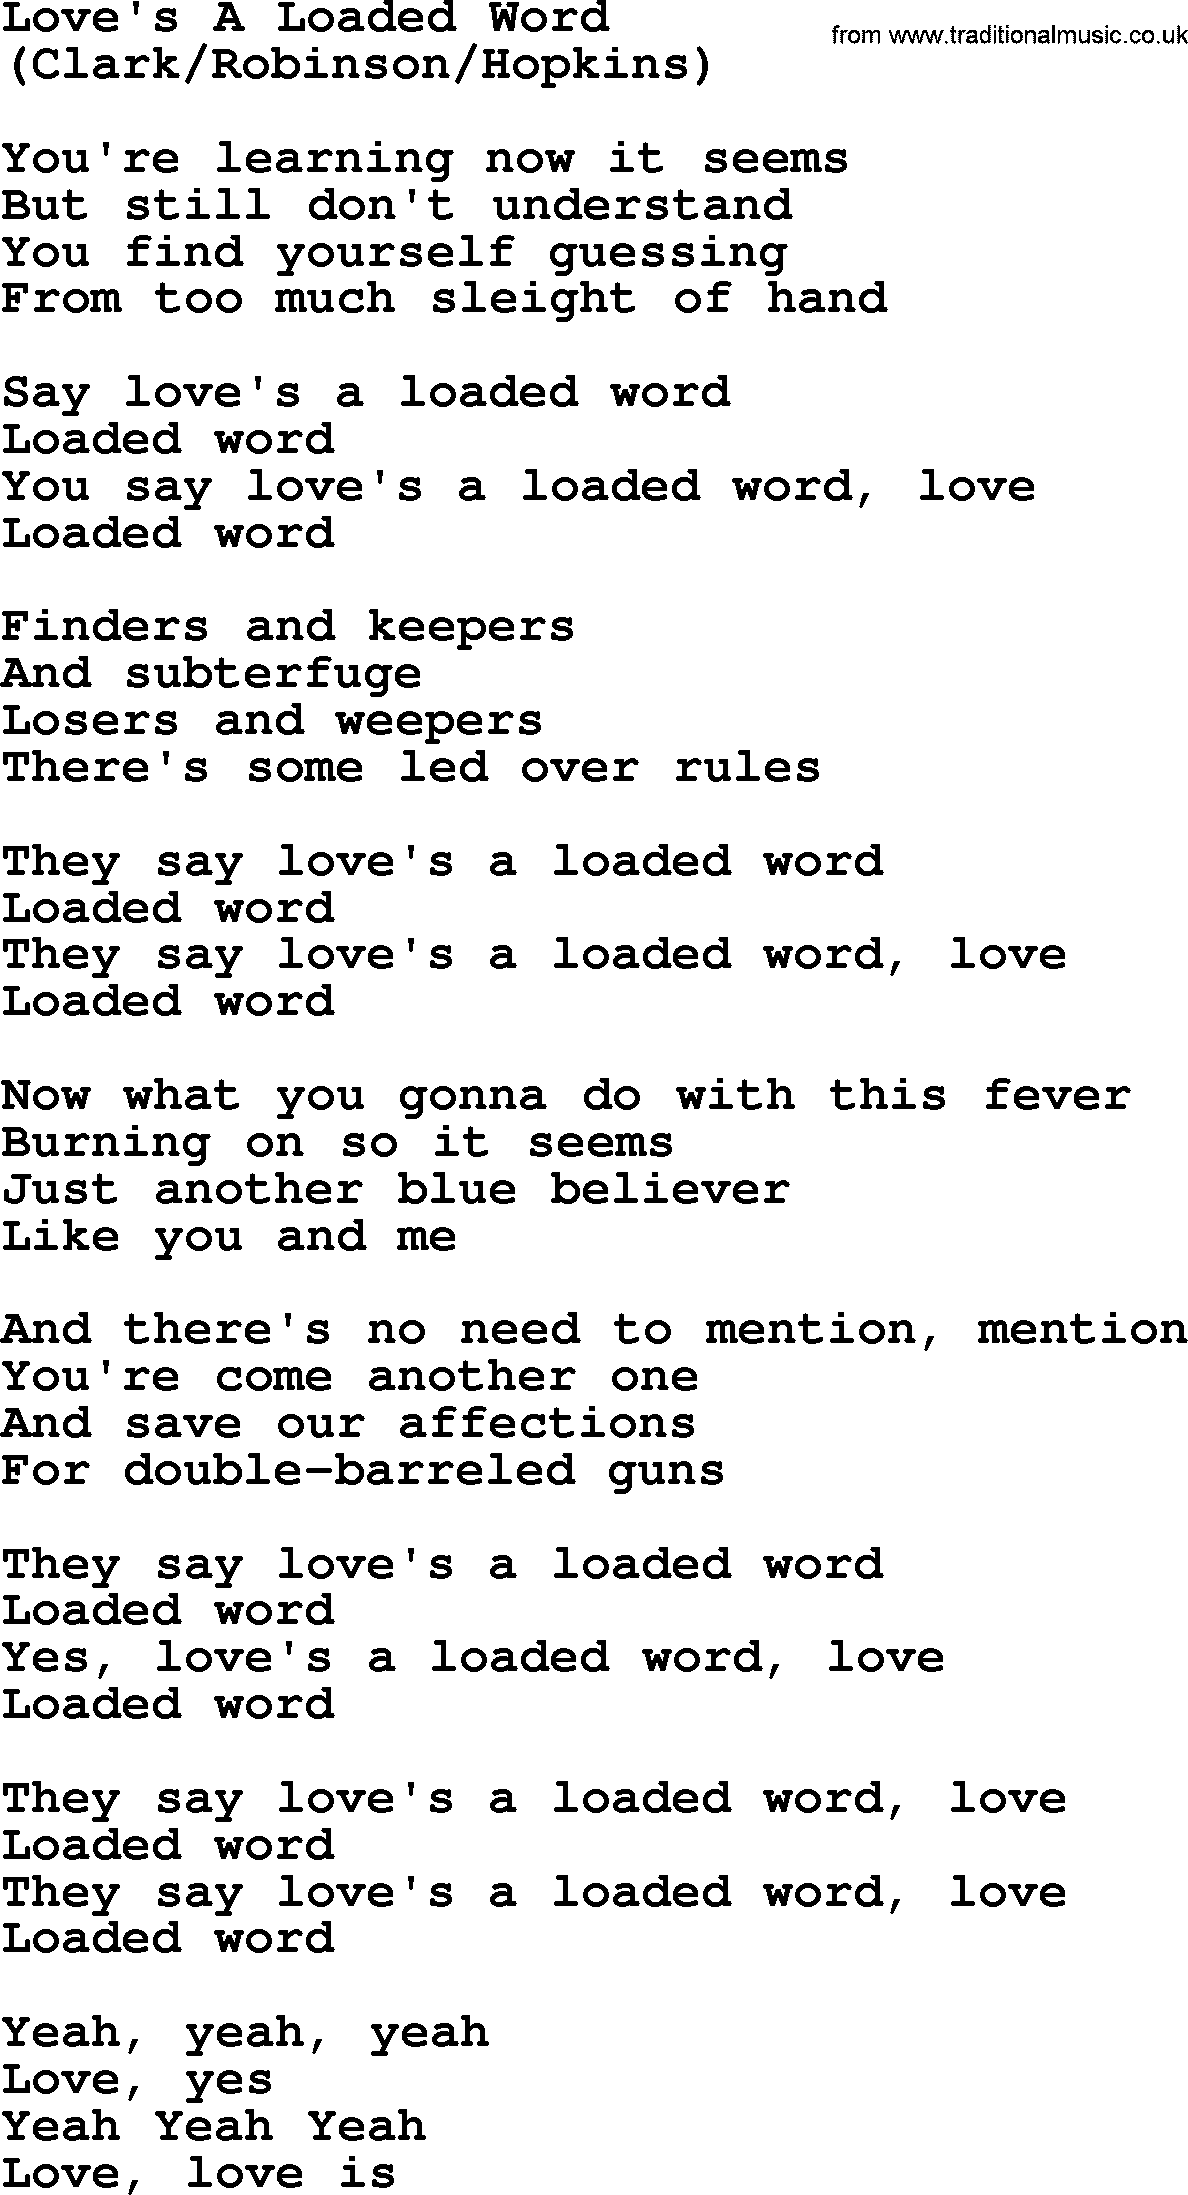 The Byrds song Love's A Loaded Word, lyrics